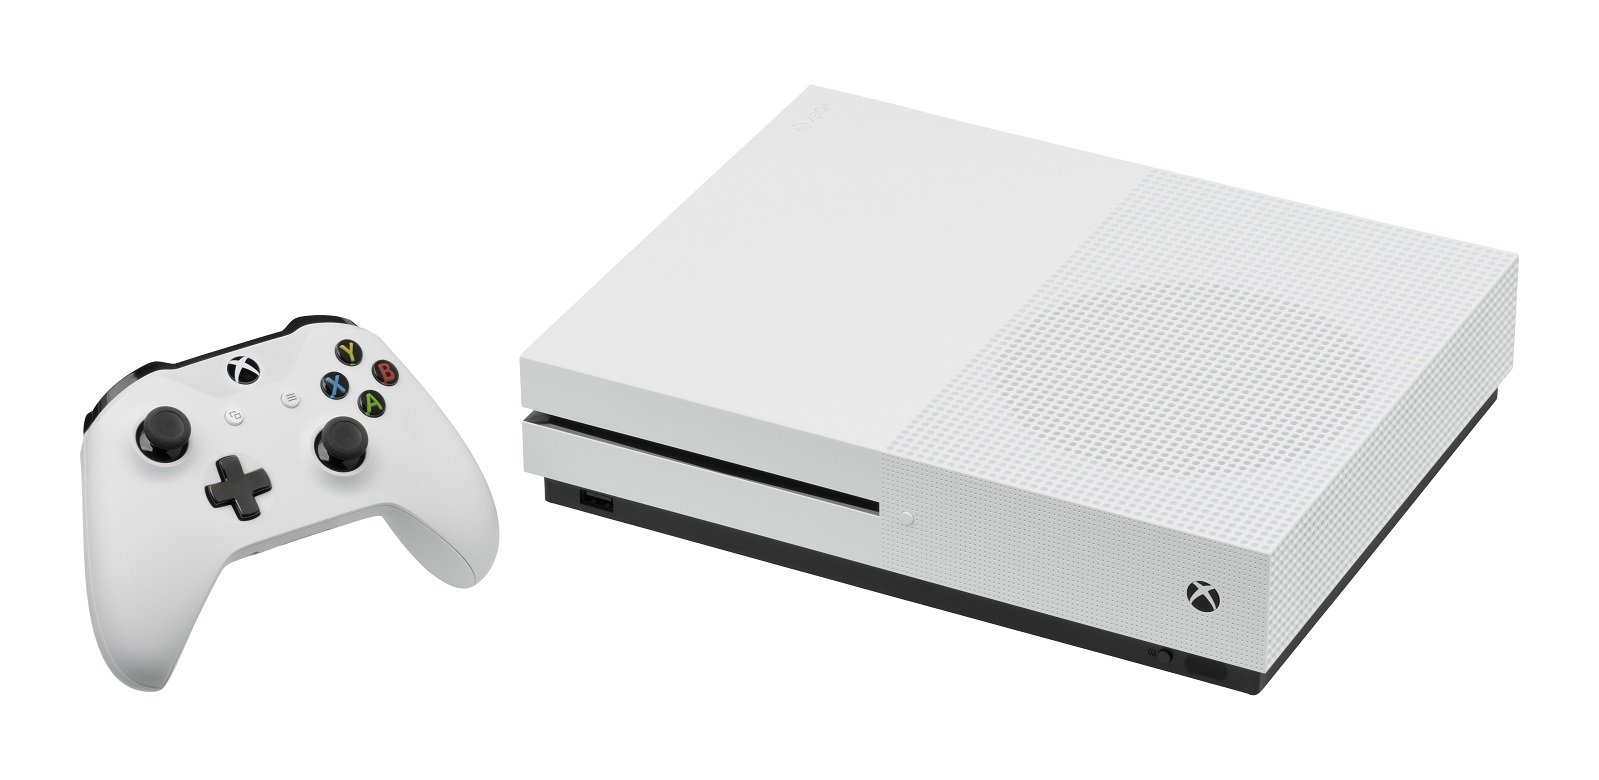 Some New Details Emerge Regarding Microsoft's Xbox Two Console Release